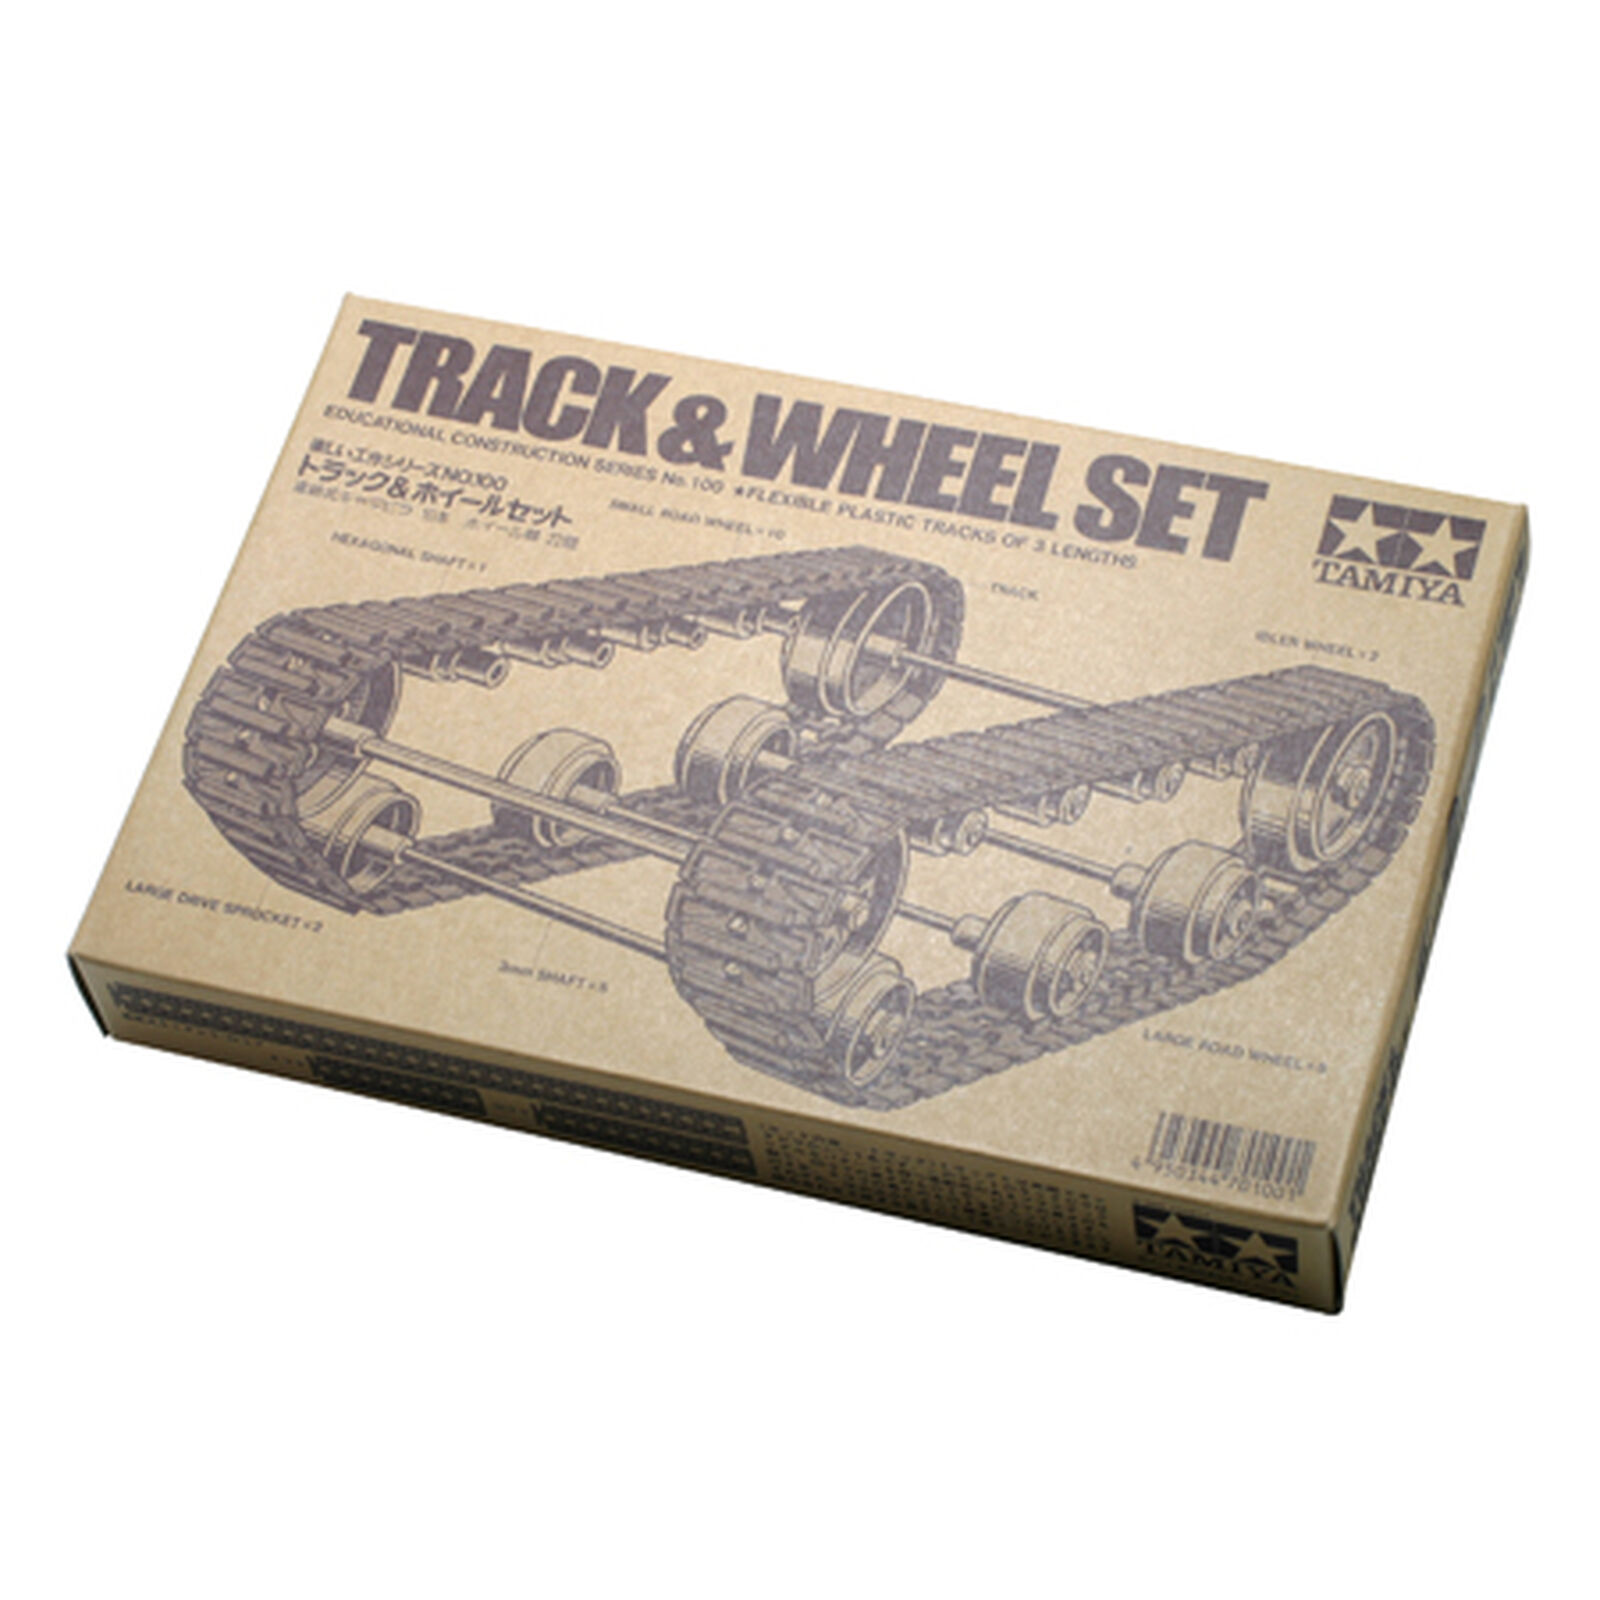 Track and Wheel Set